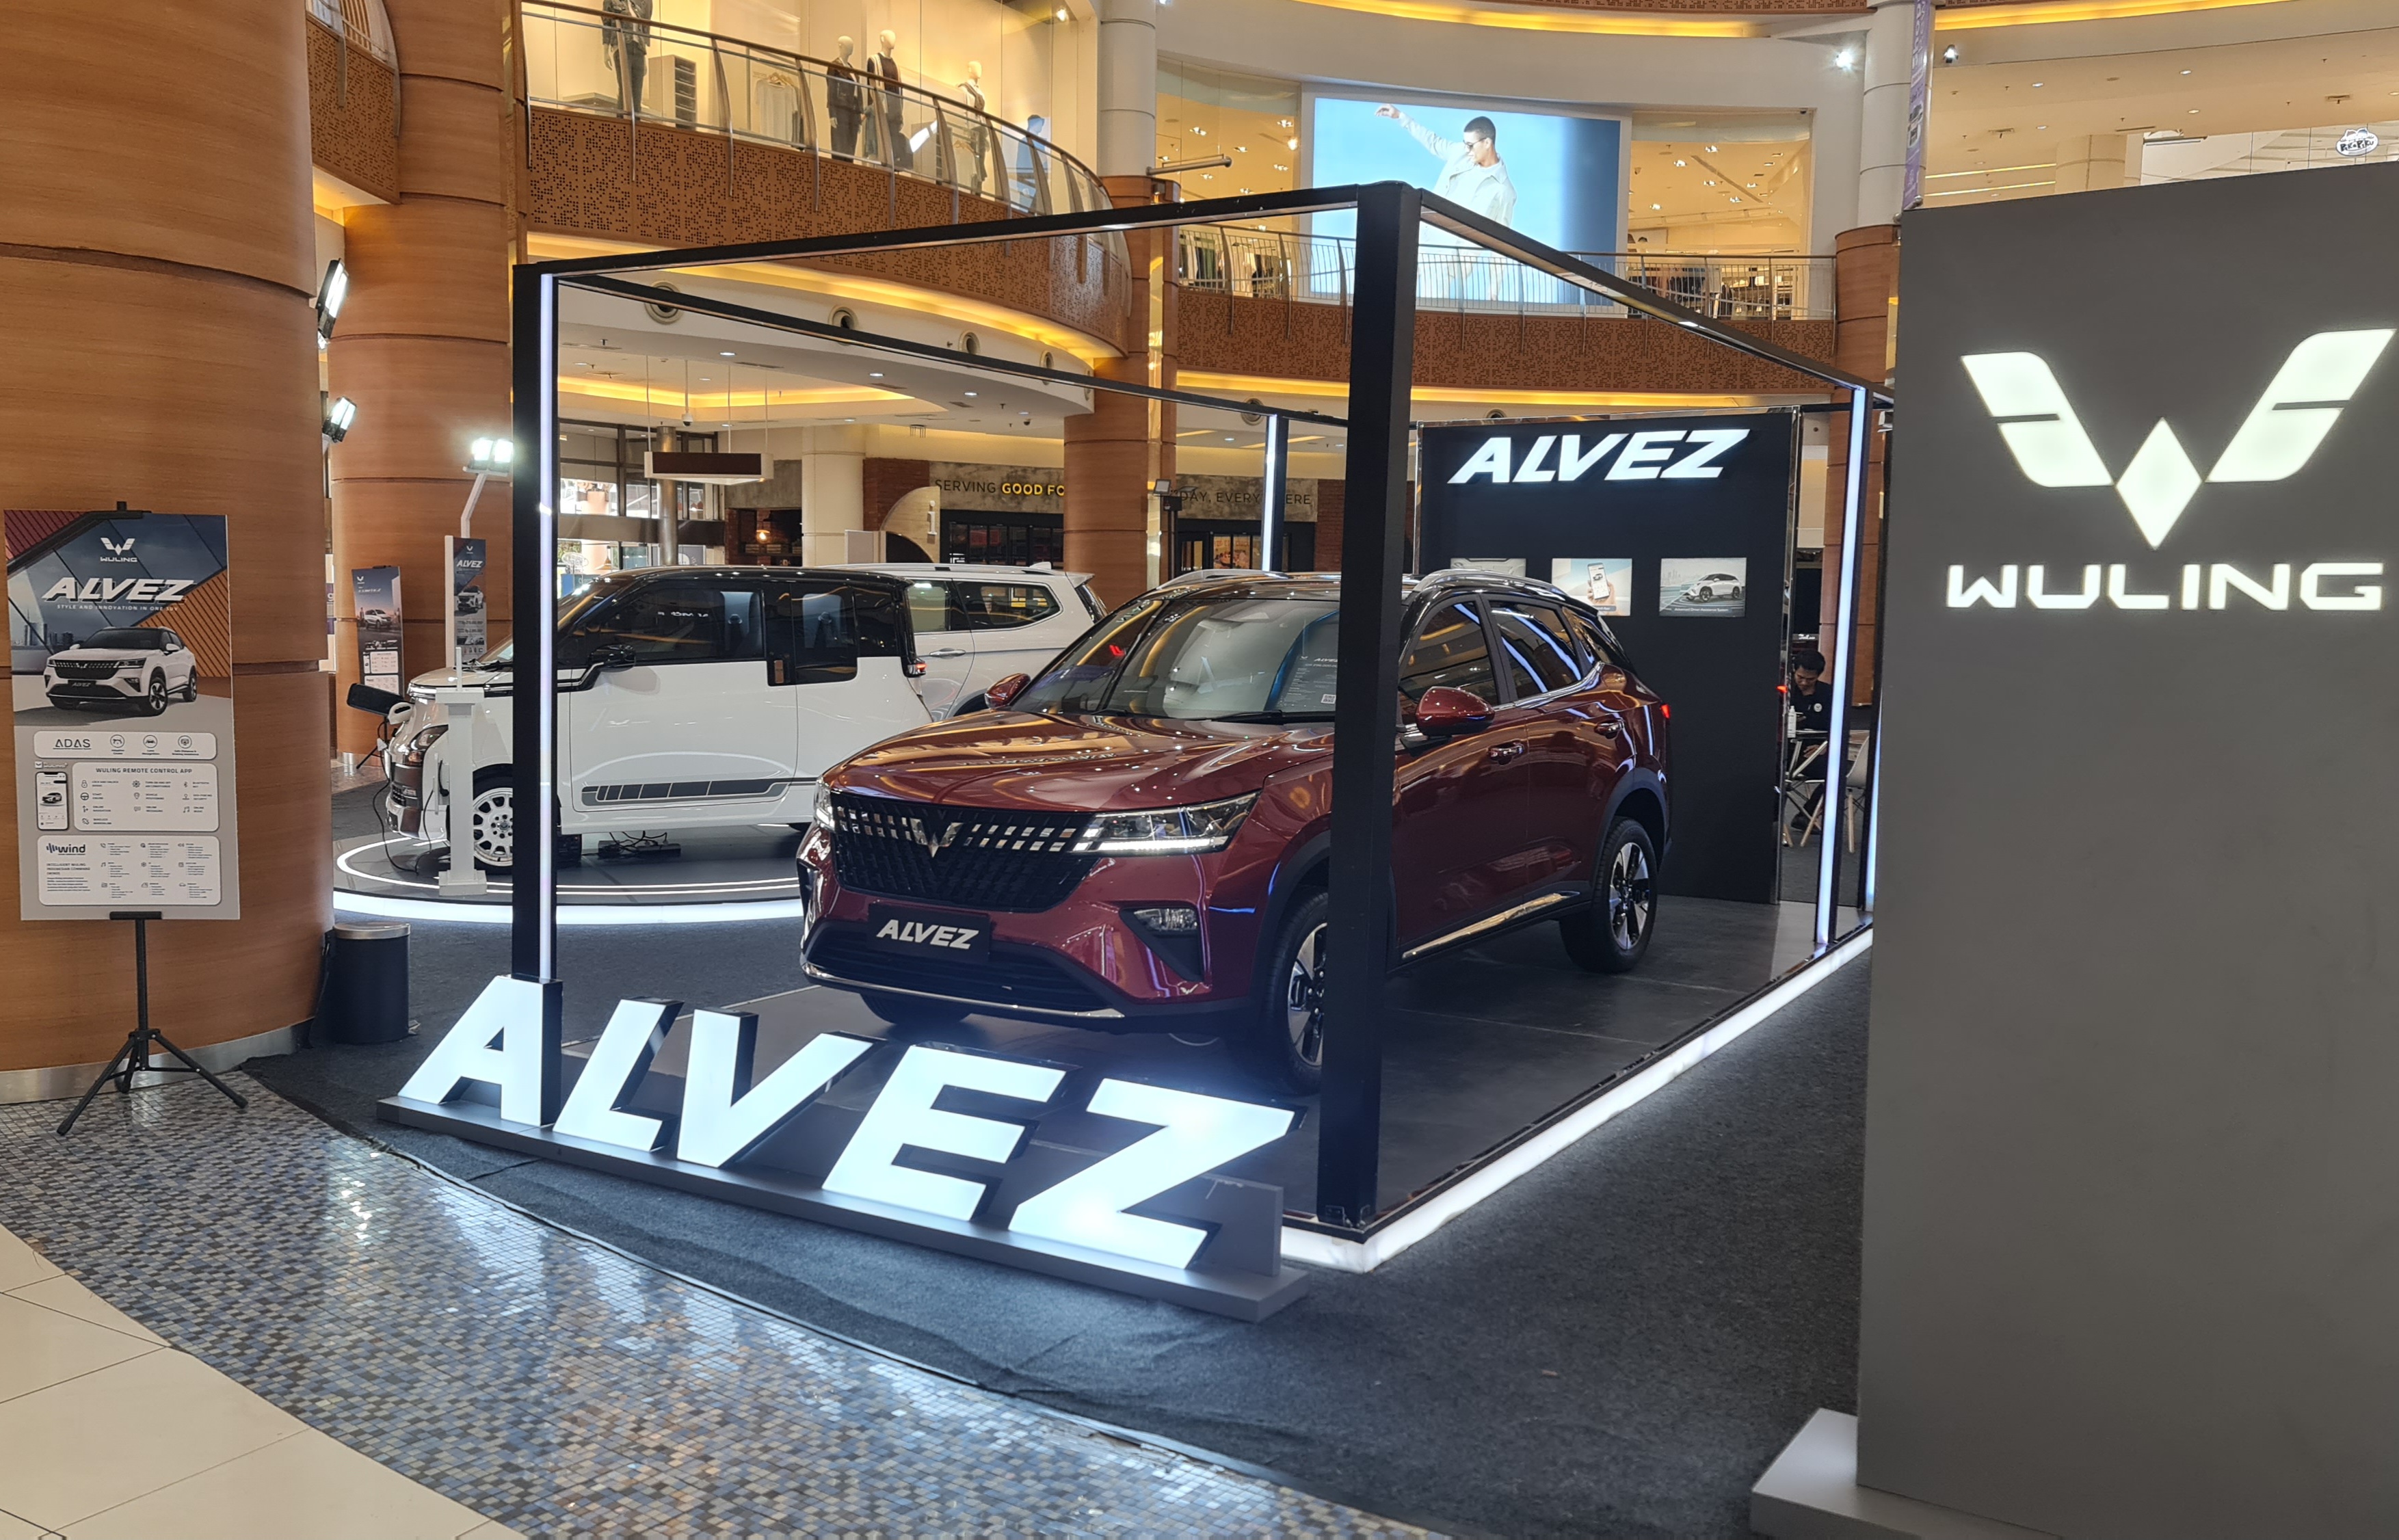 Image Alvez, Wuling Newest Compact SUV Officially Launched in Tangerang